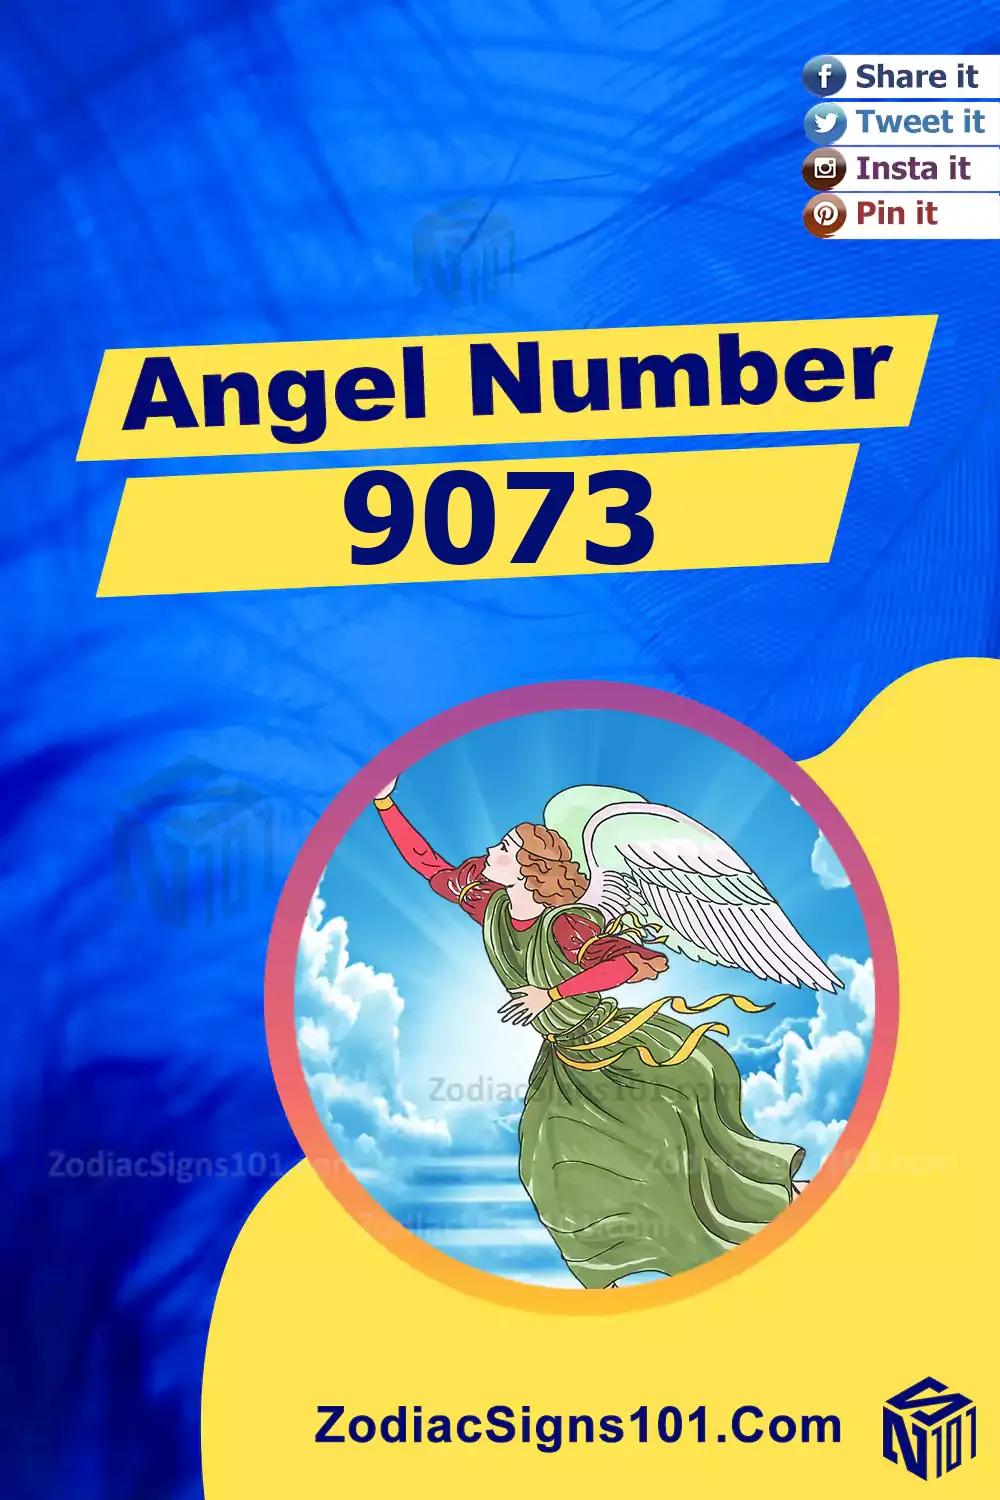 9073 Angel Number Meaning